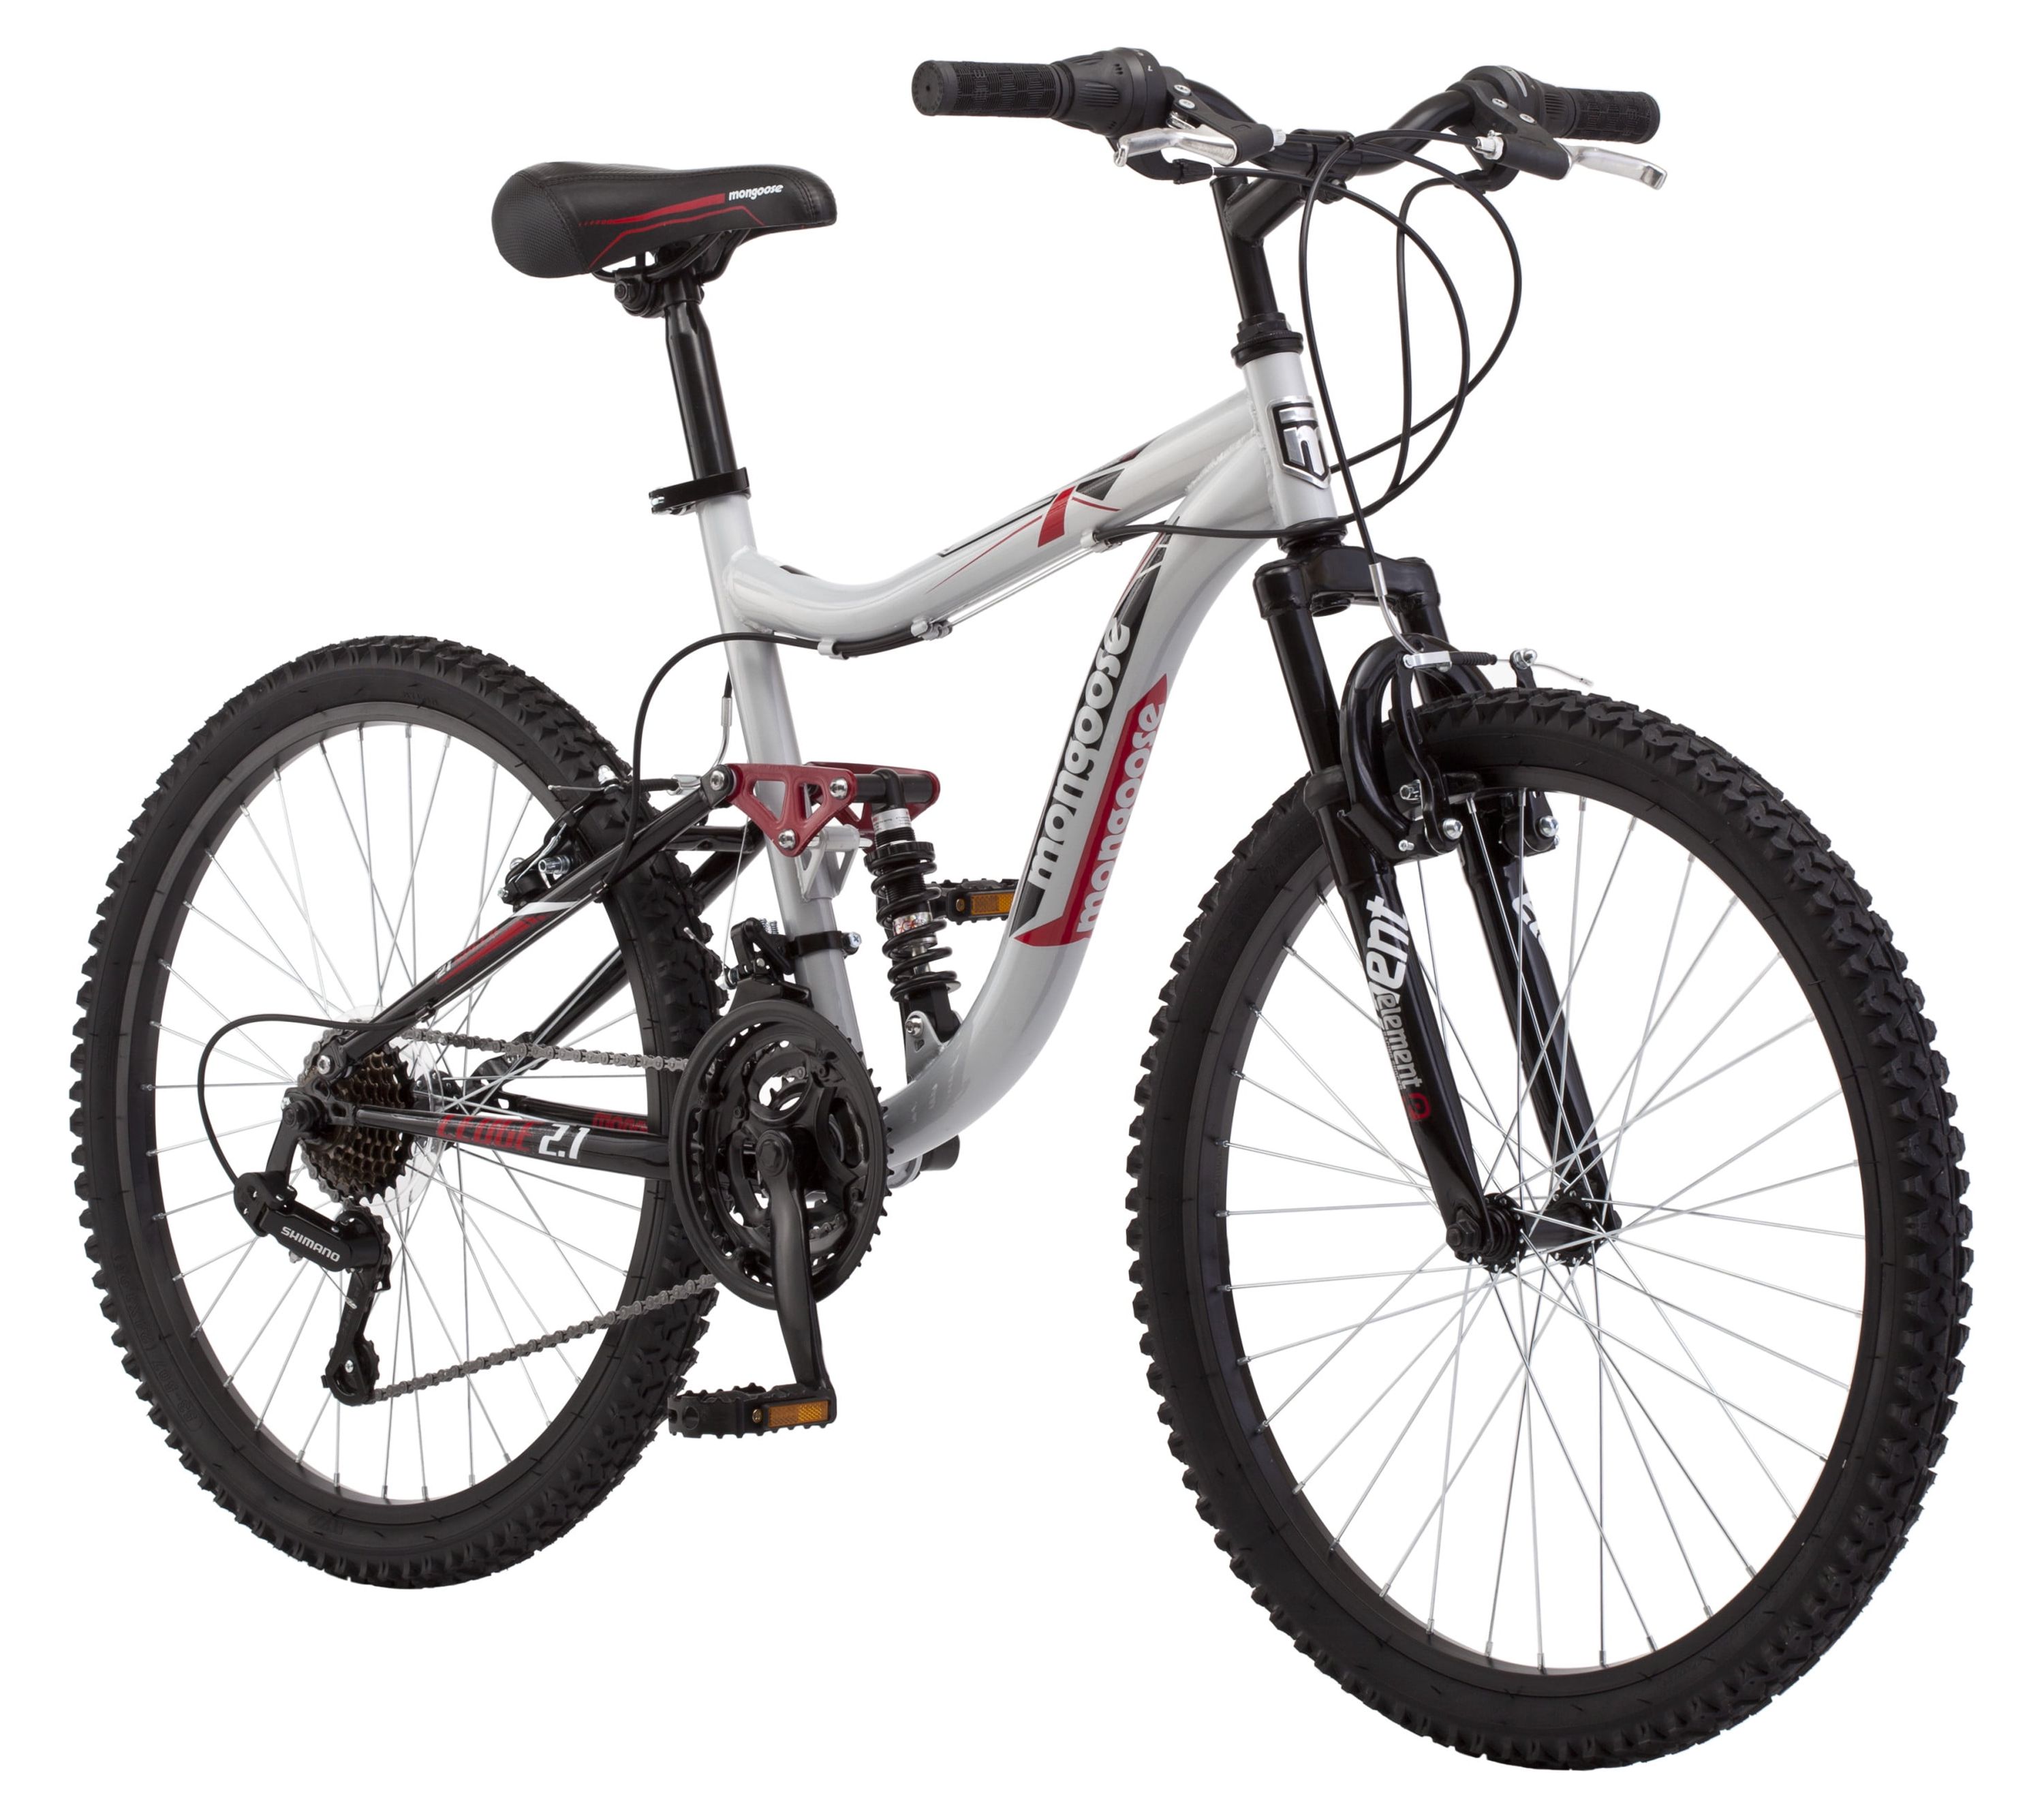 Mongoose Ledge 2.1 Mountain Bike, 24-inch wheels, 21 speeds, boys frame, Silver/Red - image 1 of 8